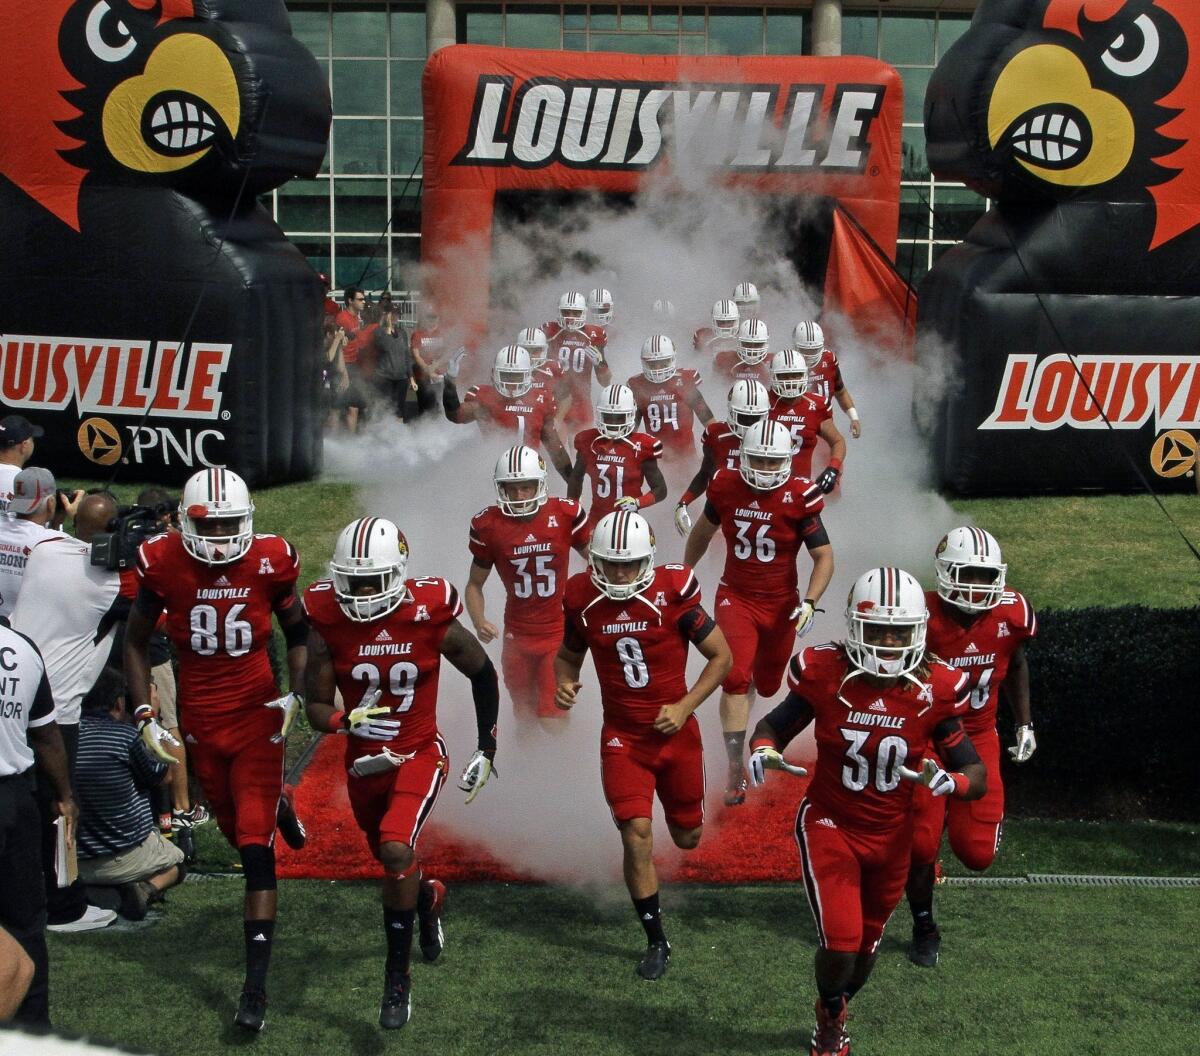 Louisville will finally face a decent test when they line up against Rutgers this week.